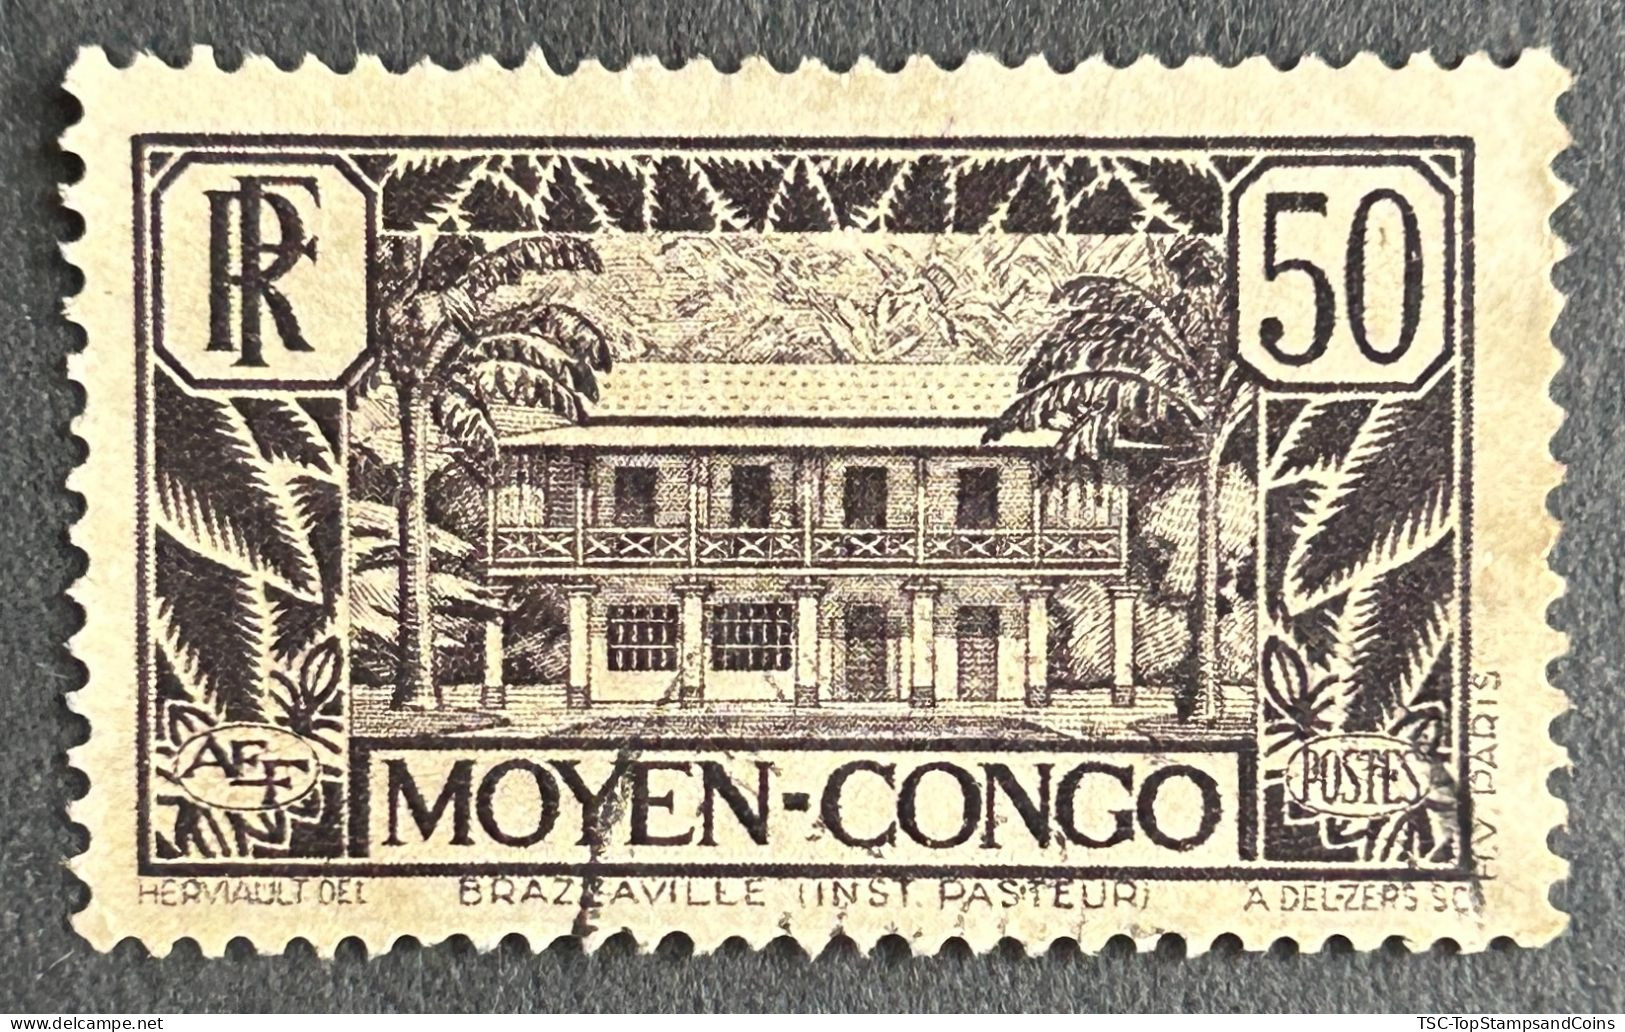 FRCG124U3 - Brazzaville - Pasteur Institute - 50 C Used Stamp - Middle Congo - 1933 - Used Stamps